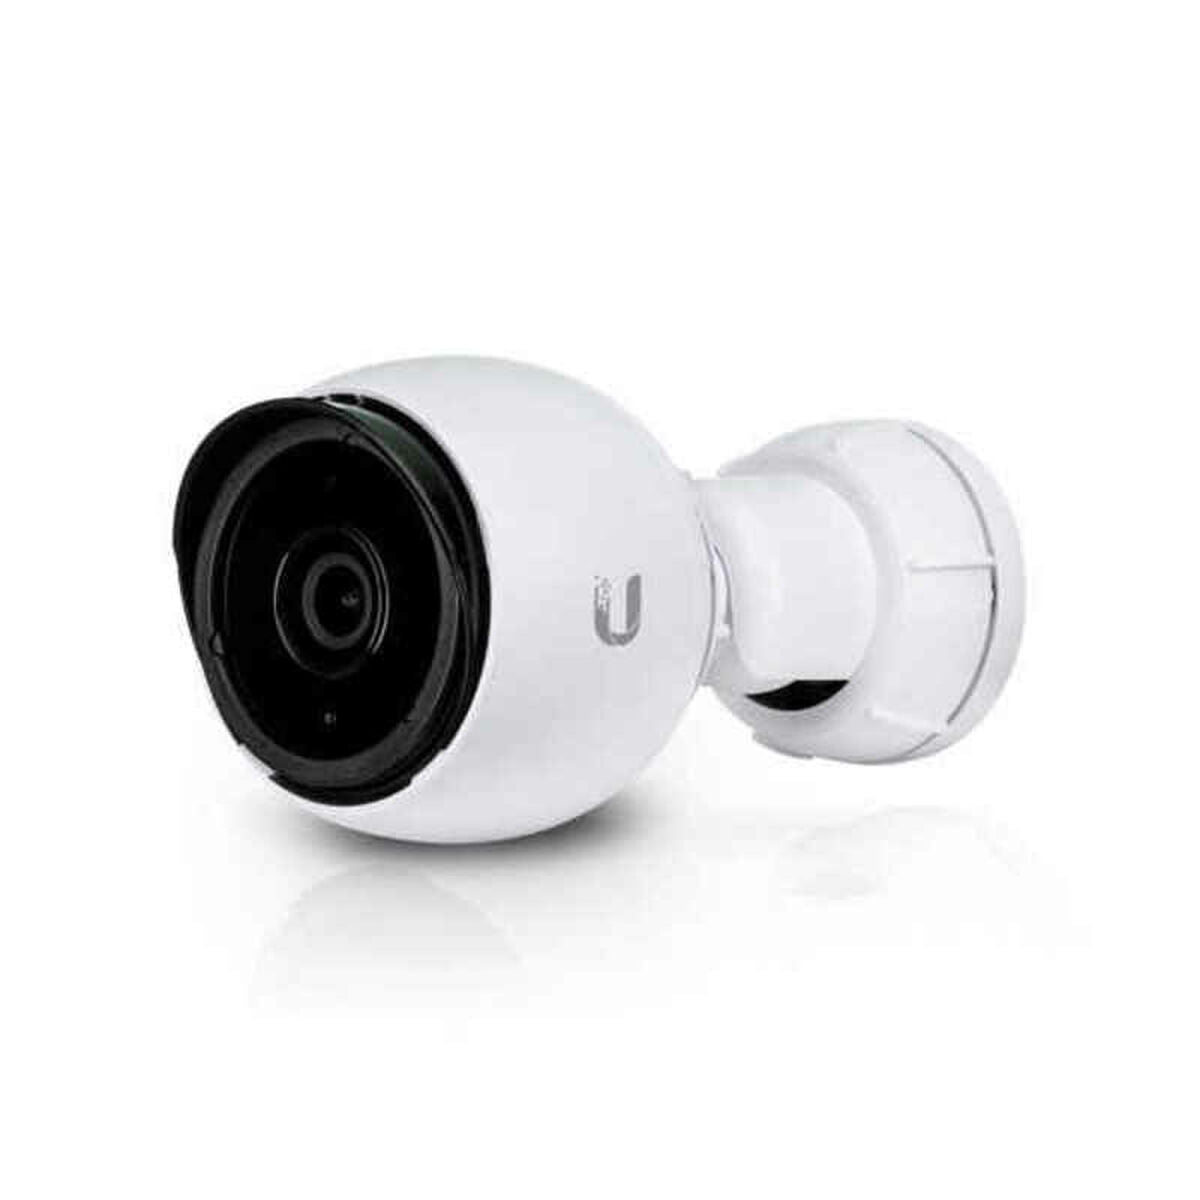 IP camera UBIQUITI UVC-G4-BULLET-3, UBIQUITI, DIY and tools, Prevention and safety, ip-camera-ubiquiti-uvc-g4-bullet-3, Brand_UBIQUITI, category-reference-2399, category-reference-2471, category-reference-3209, category-reference-t-15436, category-reference-t-15495, category-reference-t-19651, category-reference-t-21086, category-reference-t-25211, category-reference-t-29100, Condition_NEW, ferretería, home automation / security, Price_600 - 700, RiotNook